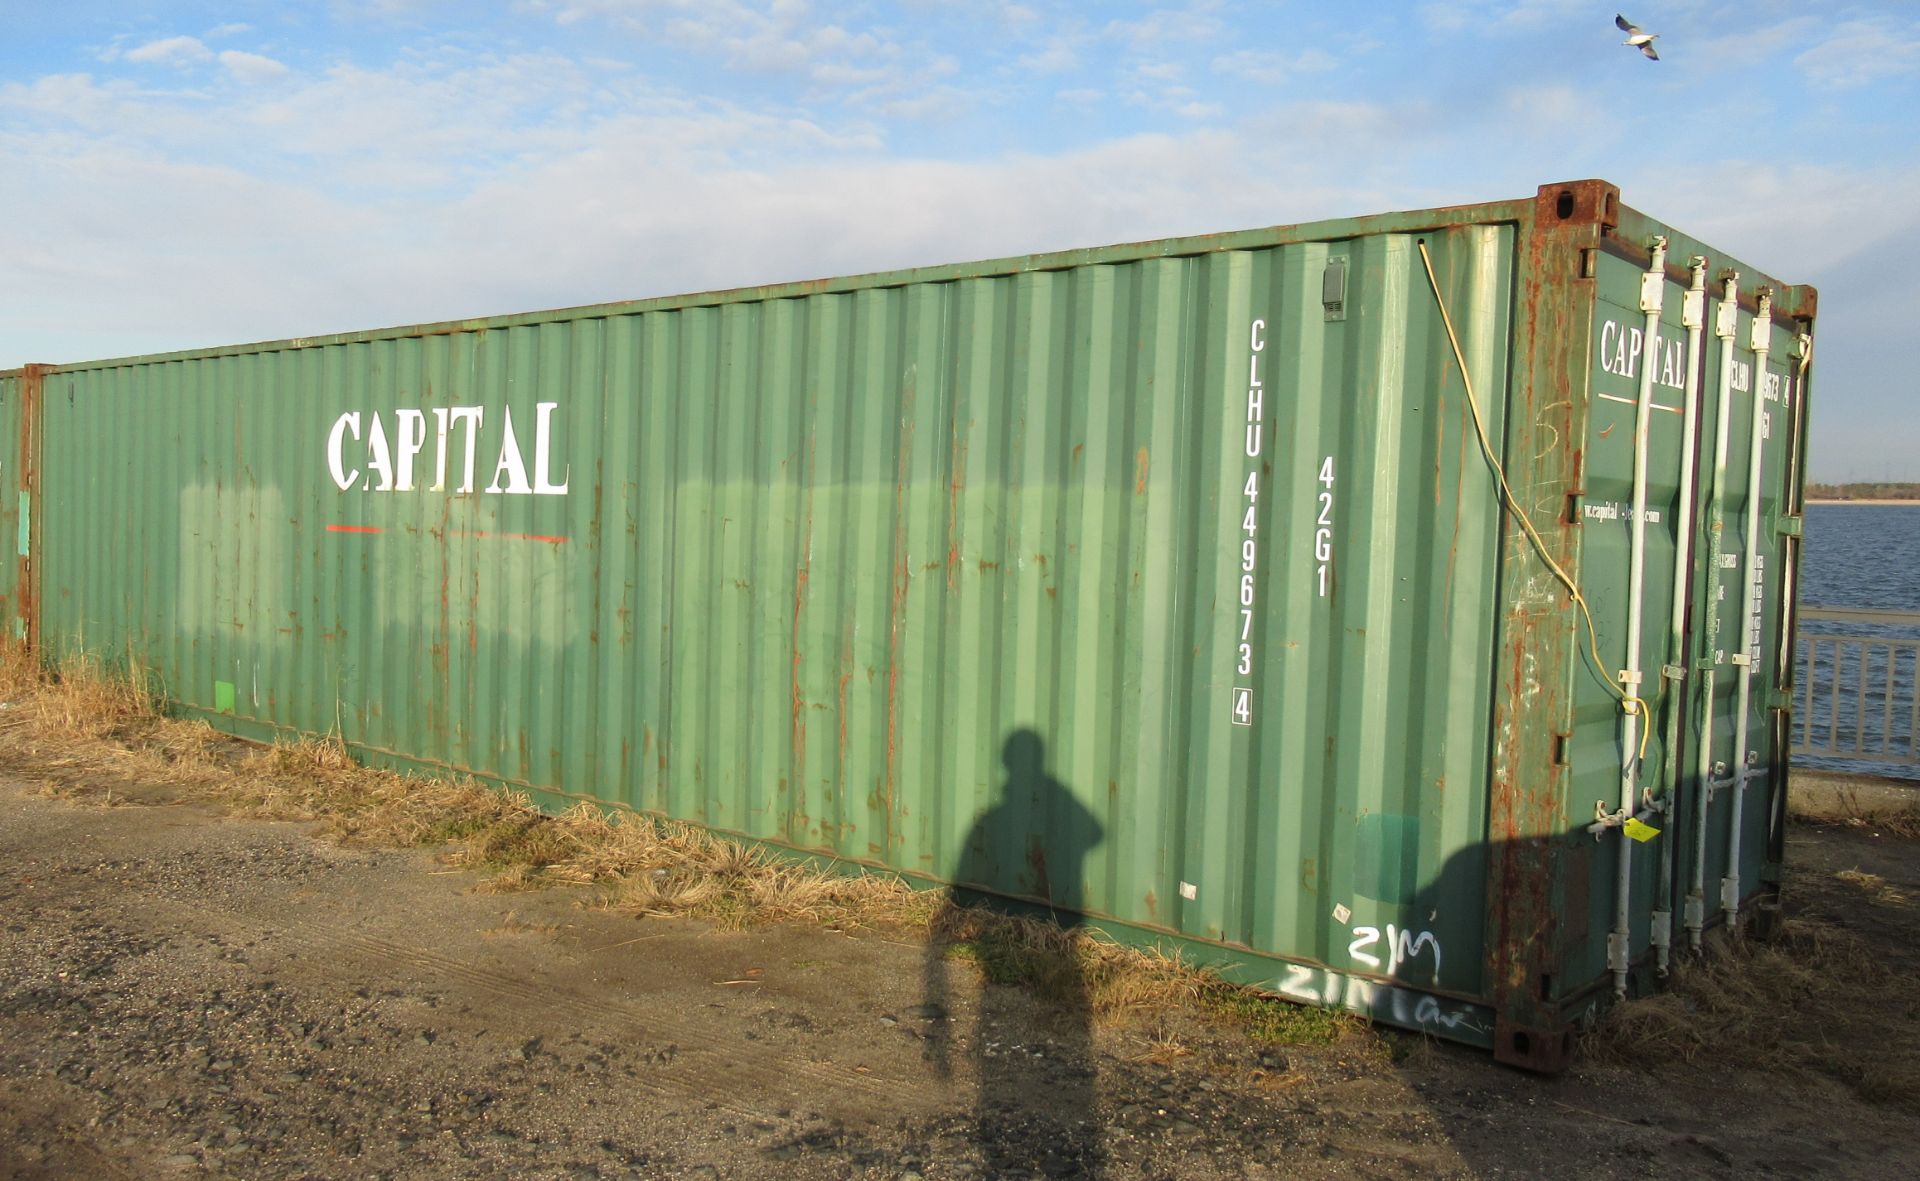 40' SHUNDE SHUN CONTAINER, TYPE SC40-CAP-01, S/N: S194117 (2003) [LOCATED @ MARINE PARKWAY - Image 2 of 4